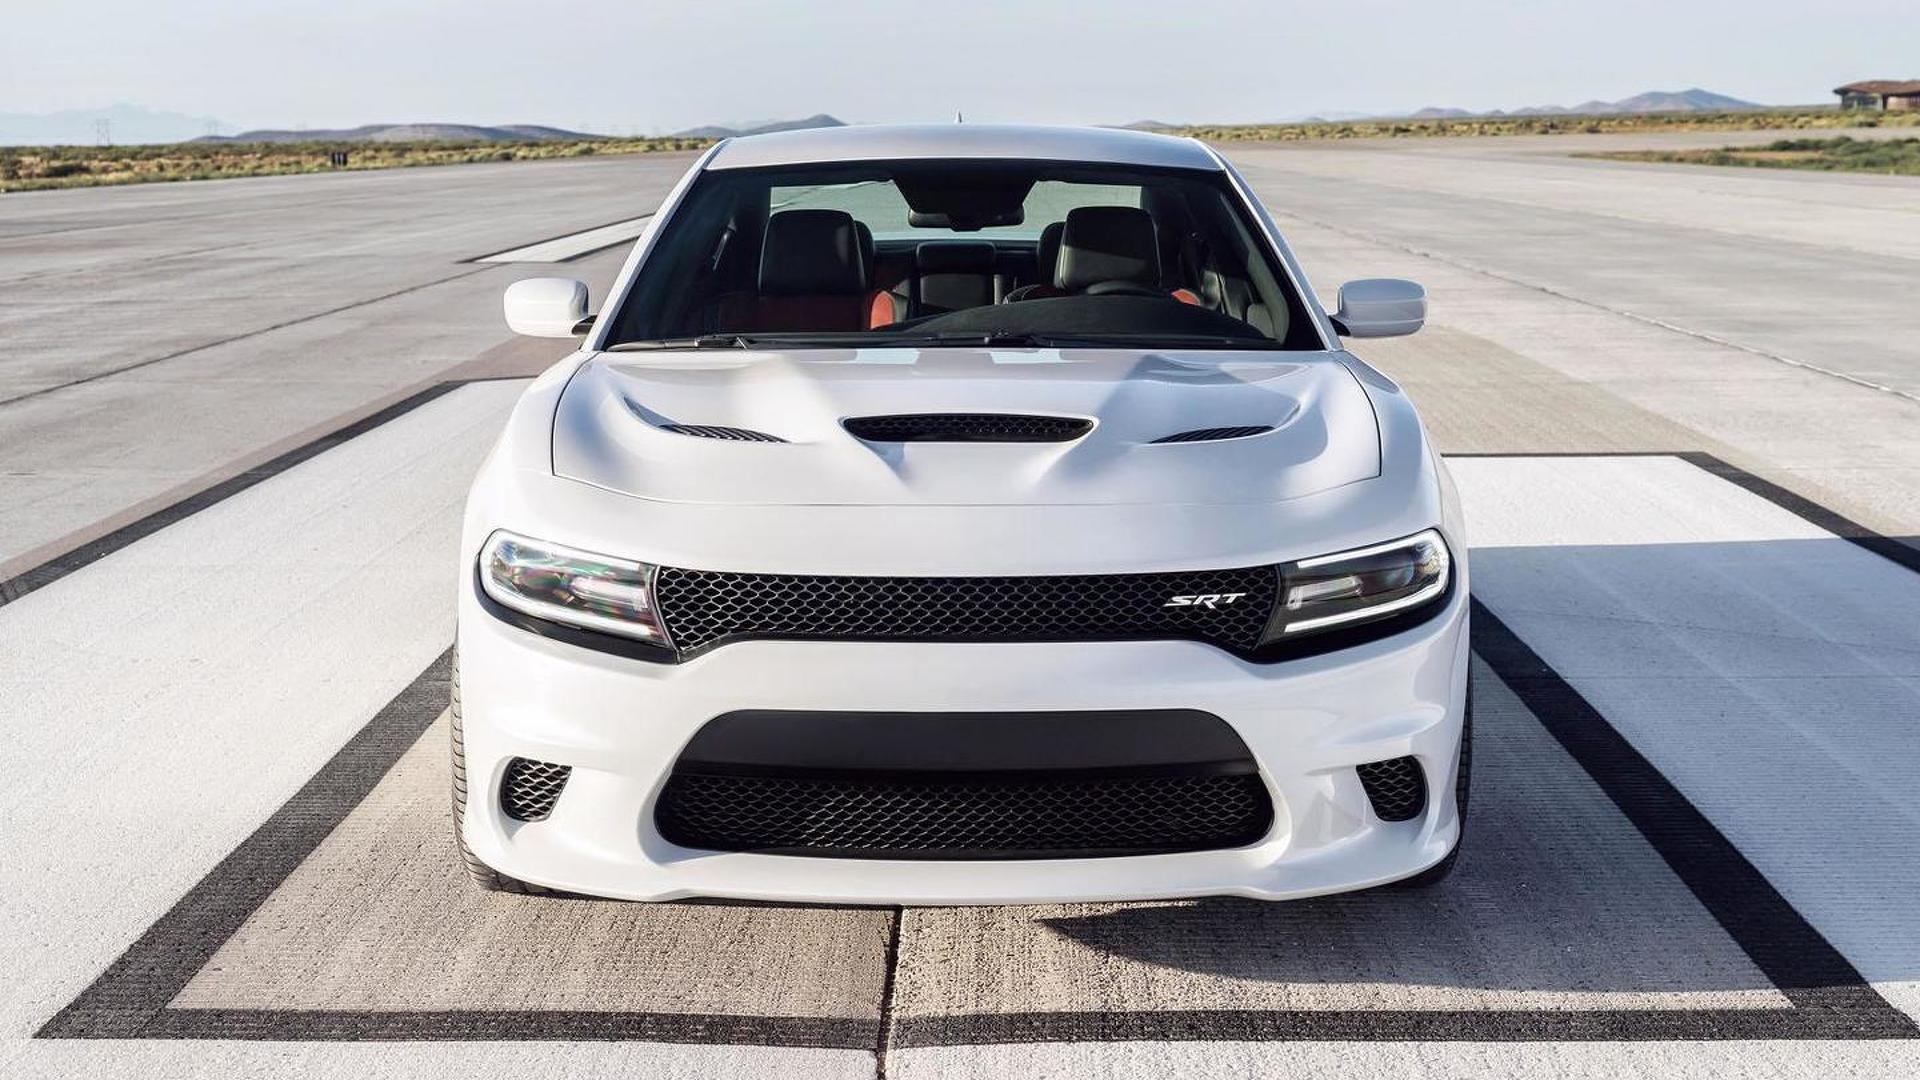 2015 Dodge Charger SRT Hellcat to cost $63,995